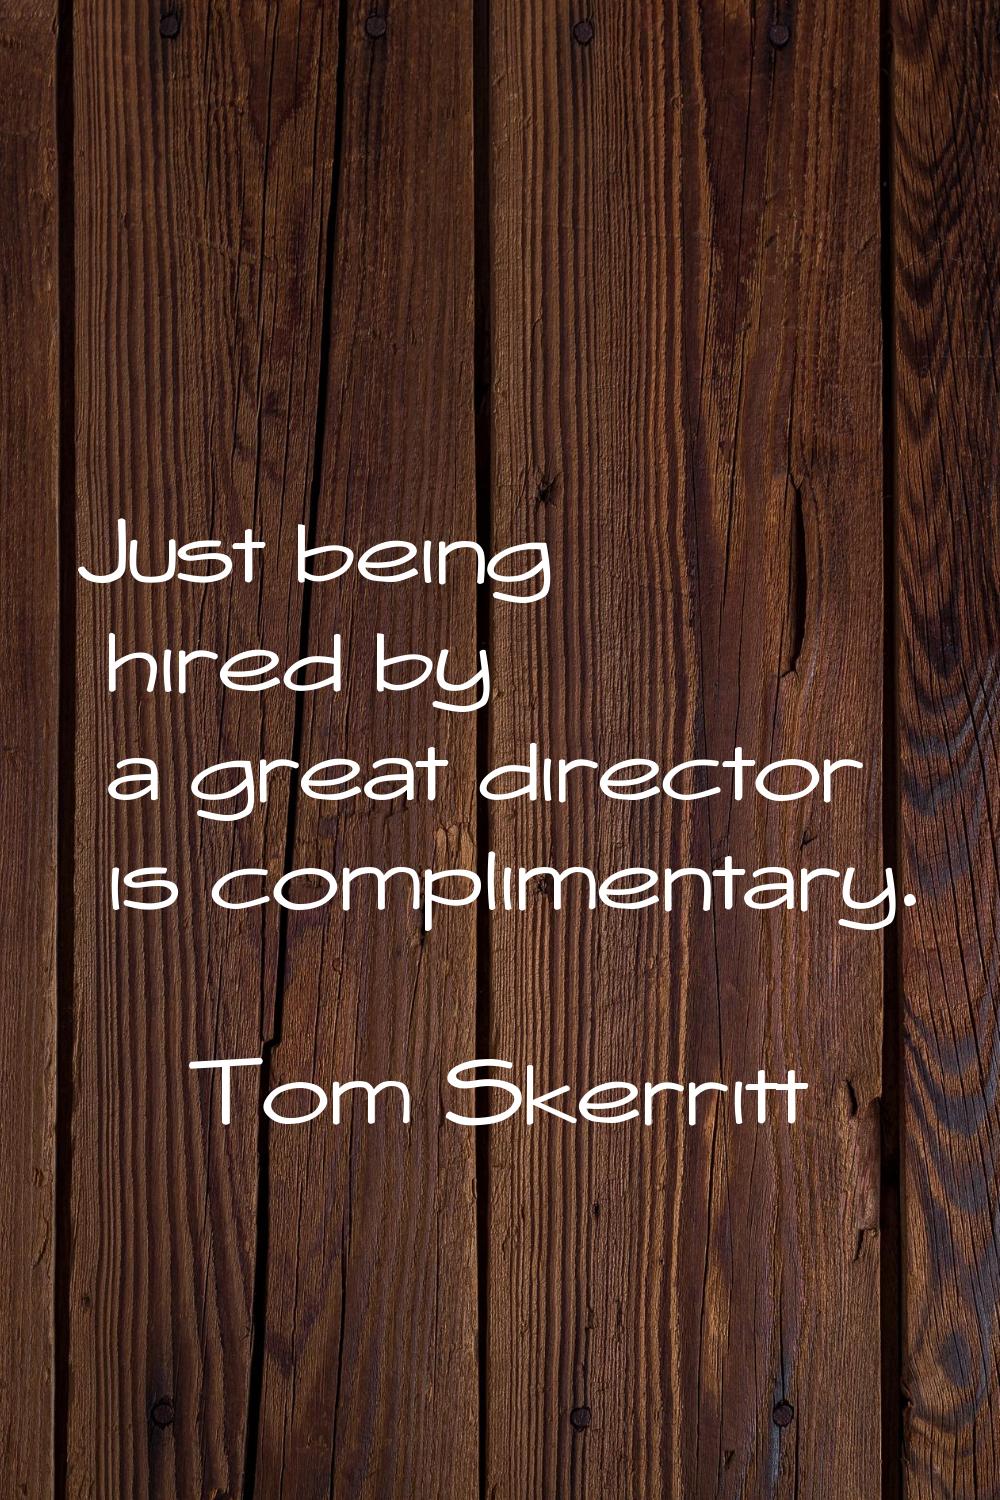 Just being hired by a great director is complimentary.